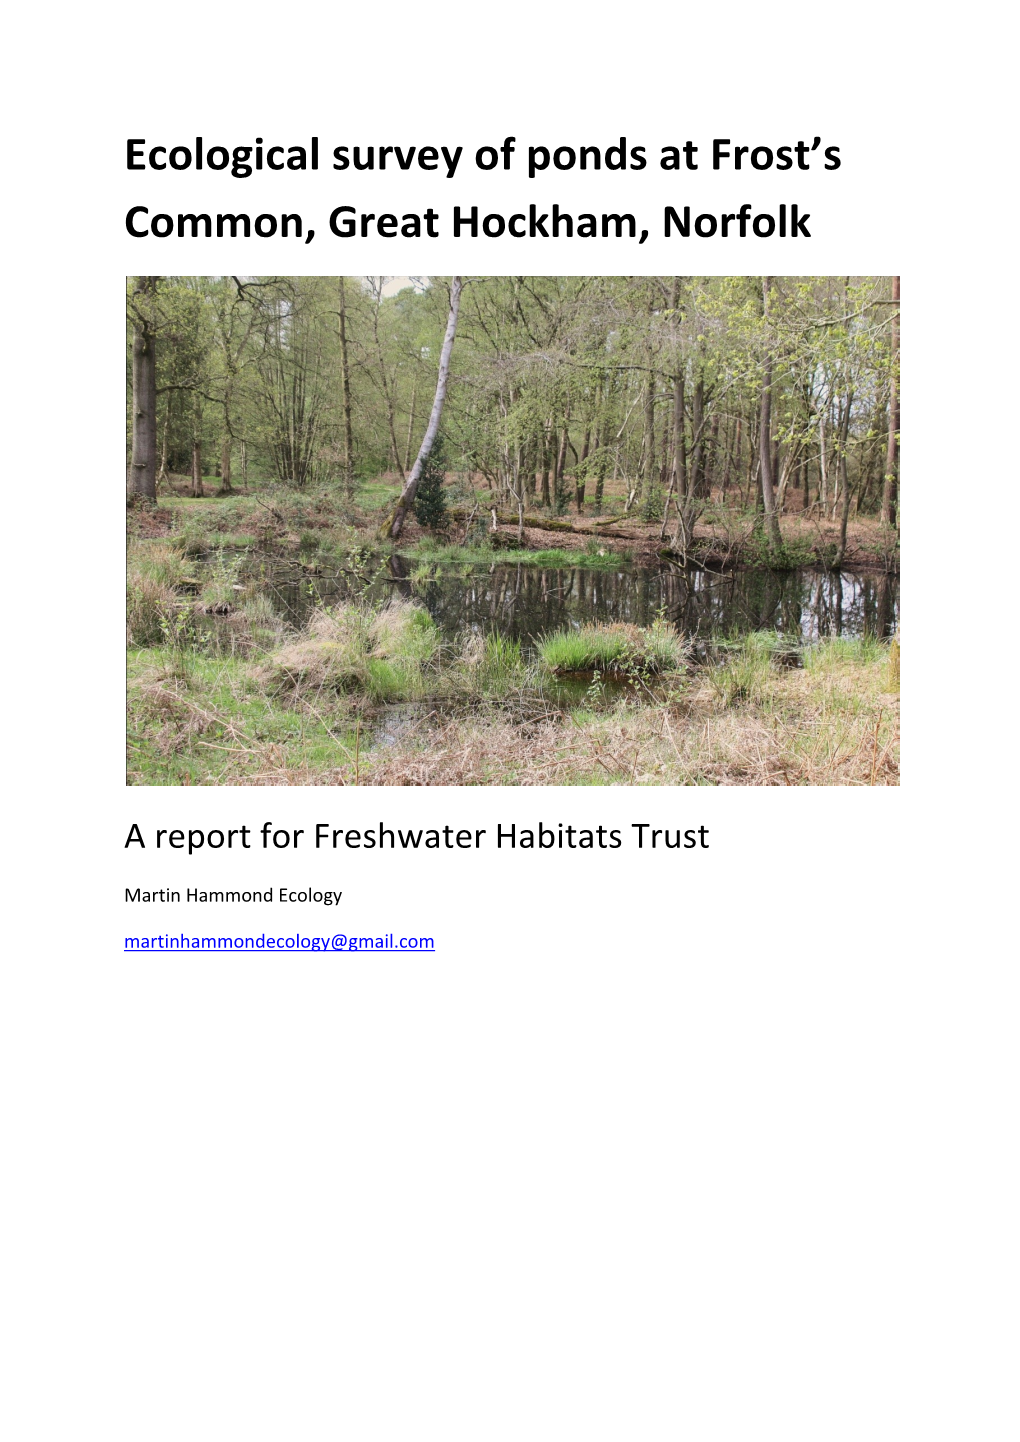 Ecological Survey of Ponds at Frost's Common, Great Hockham, Norfolk